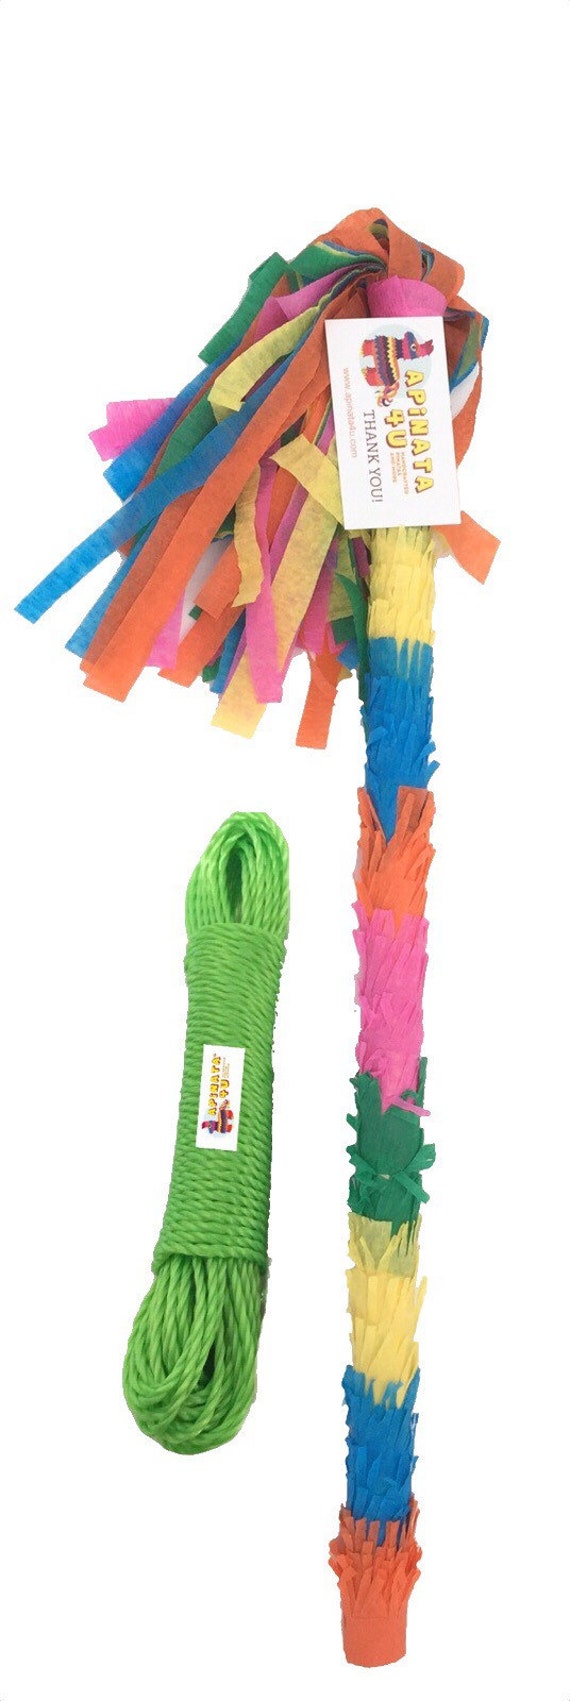 Sale Ready to Ship 20 Wooden Party Pinata Stick Pinata Wand Sturdy Hand  Decorated Custom Colors Available Free 30 Feet Rope Included -  Israel